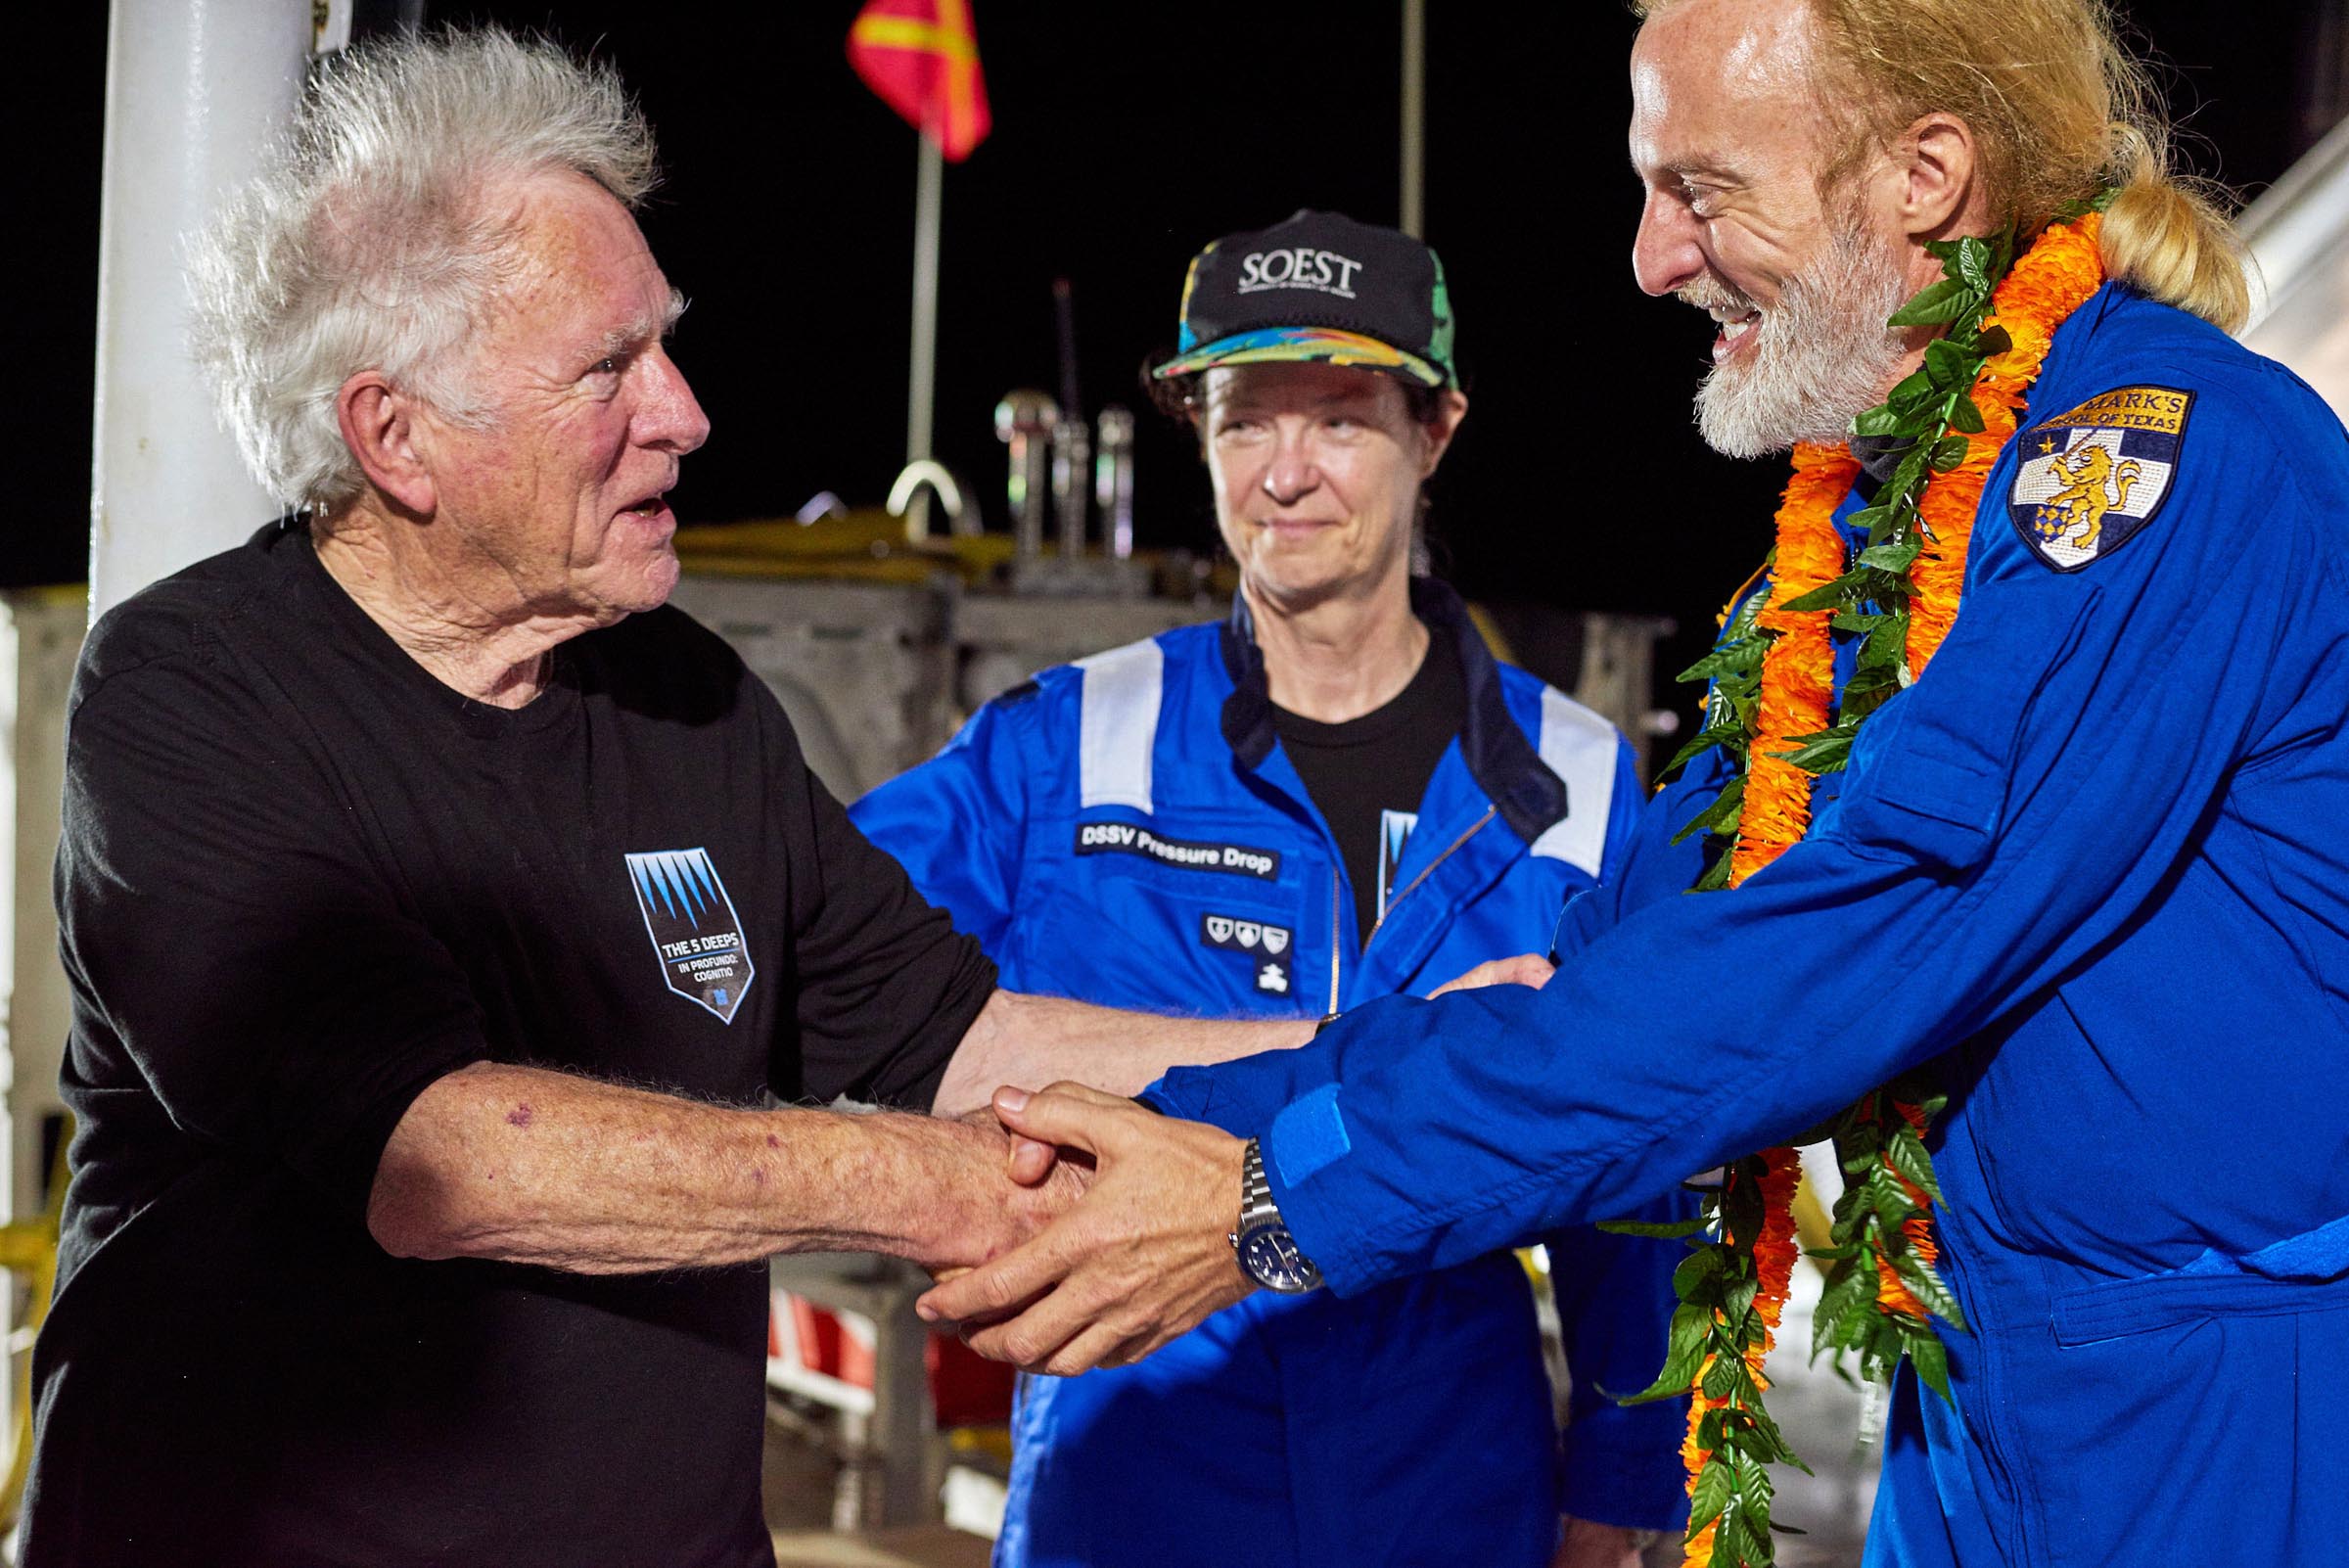 Don Walsh (left), who dived to the bottom of the Mariana Trench in 1960 with the US Navy, congratulates Victor Vescovo (right) on setting a new dive record.